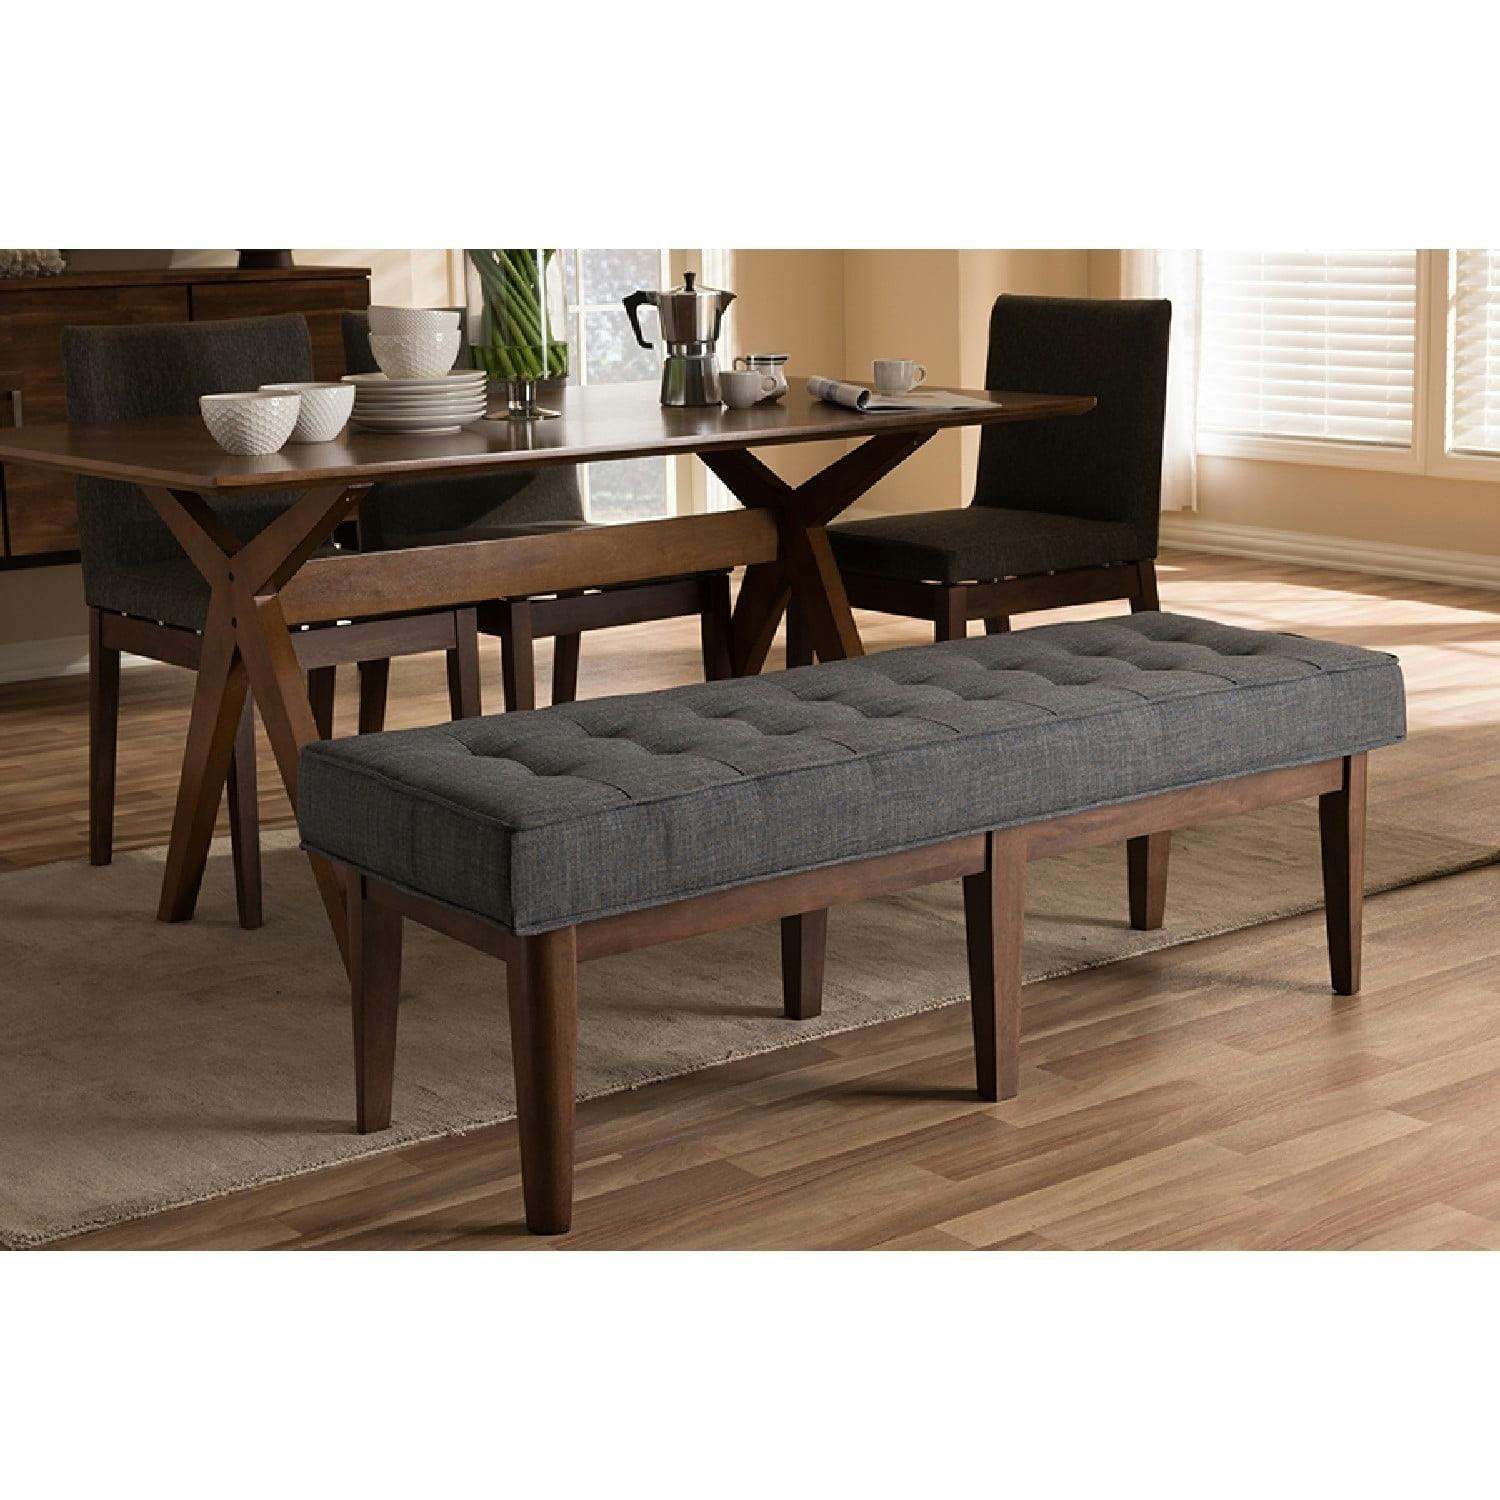 Lucca Mid-Century Button-Tufted Bench in Dark Grey and Walnut